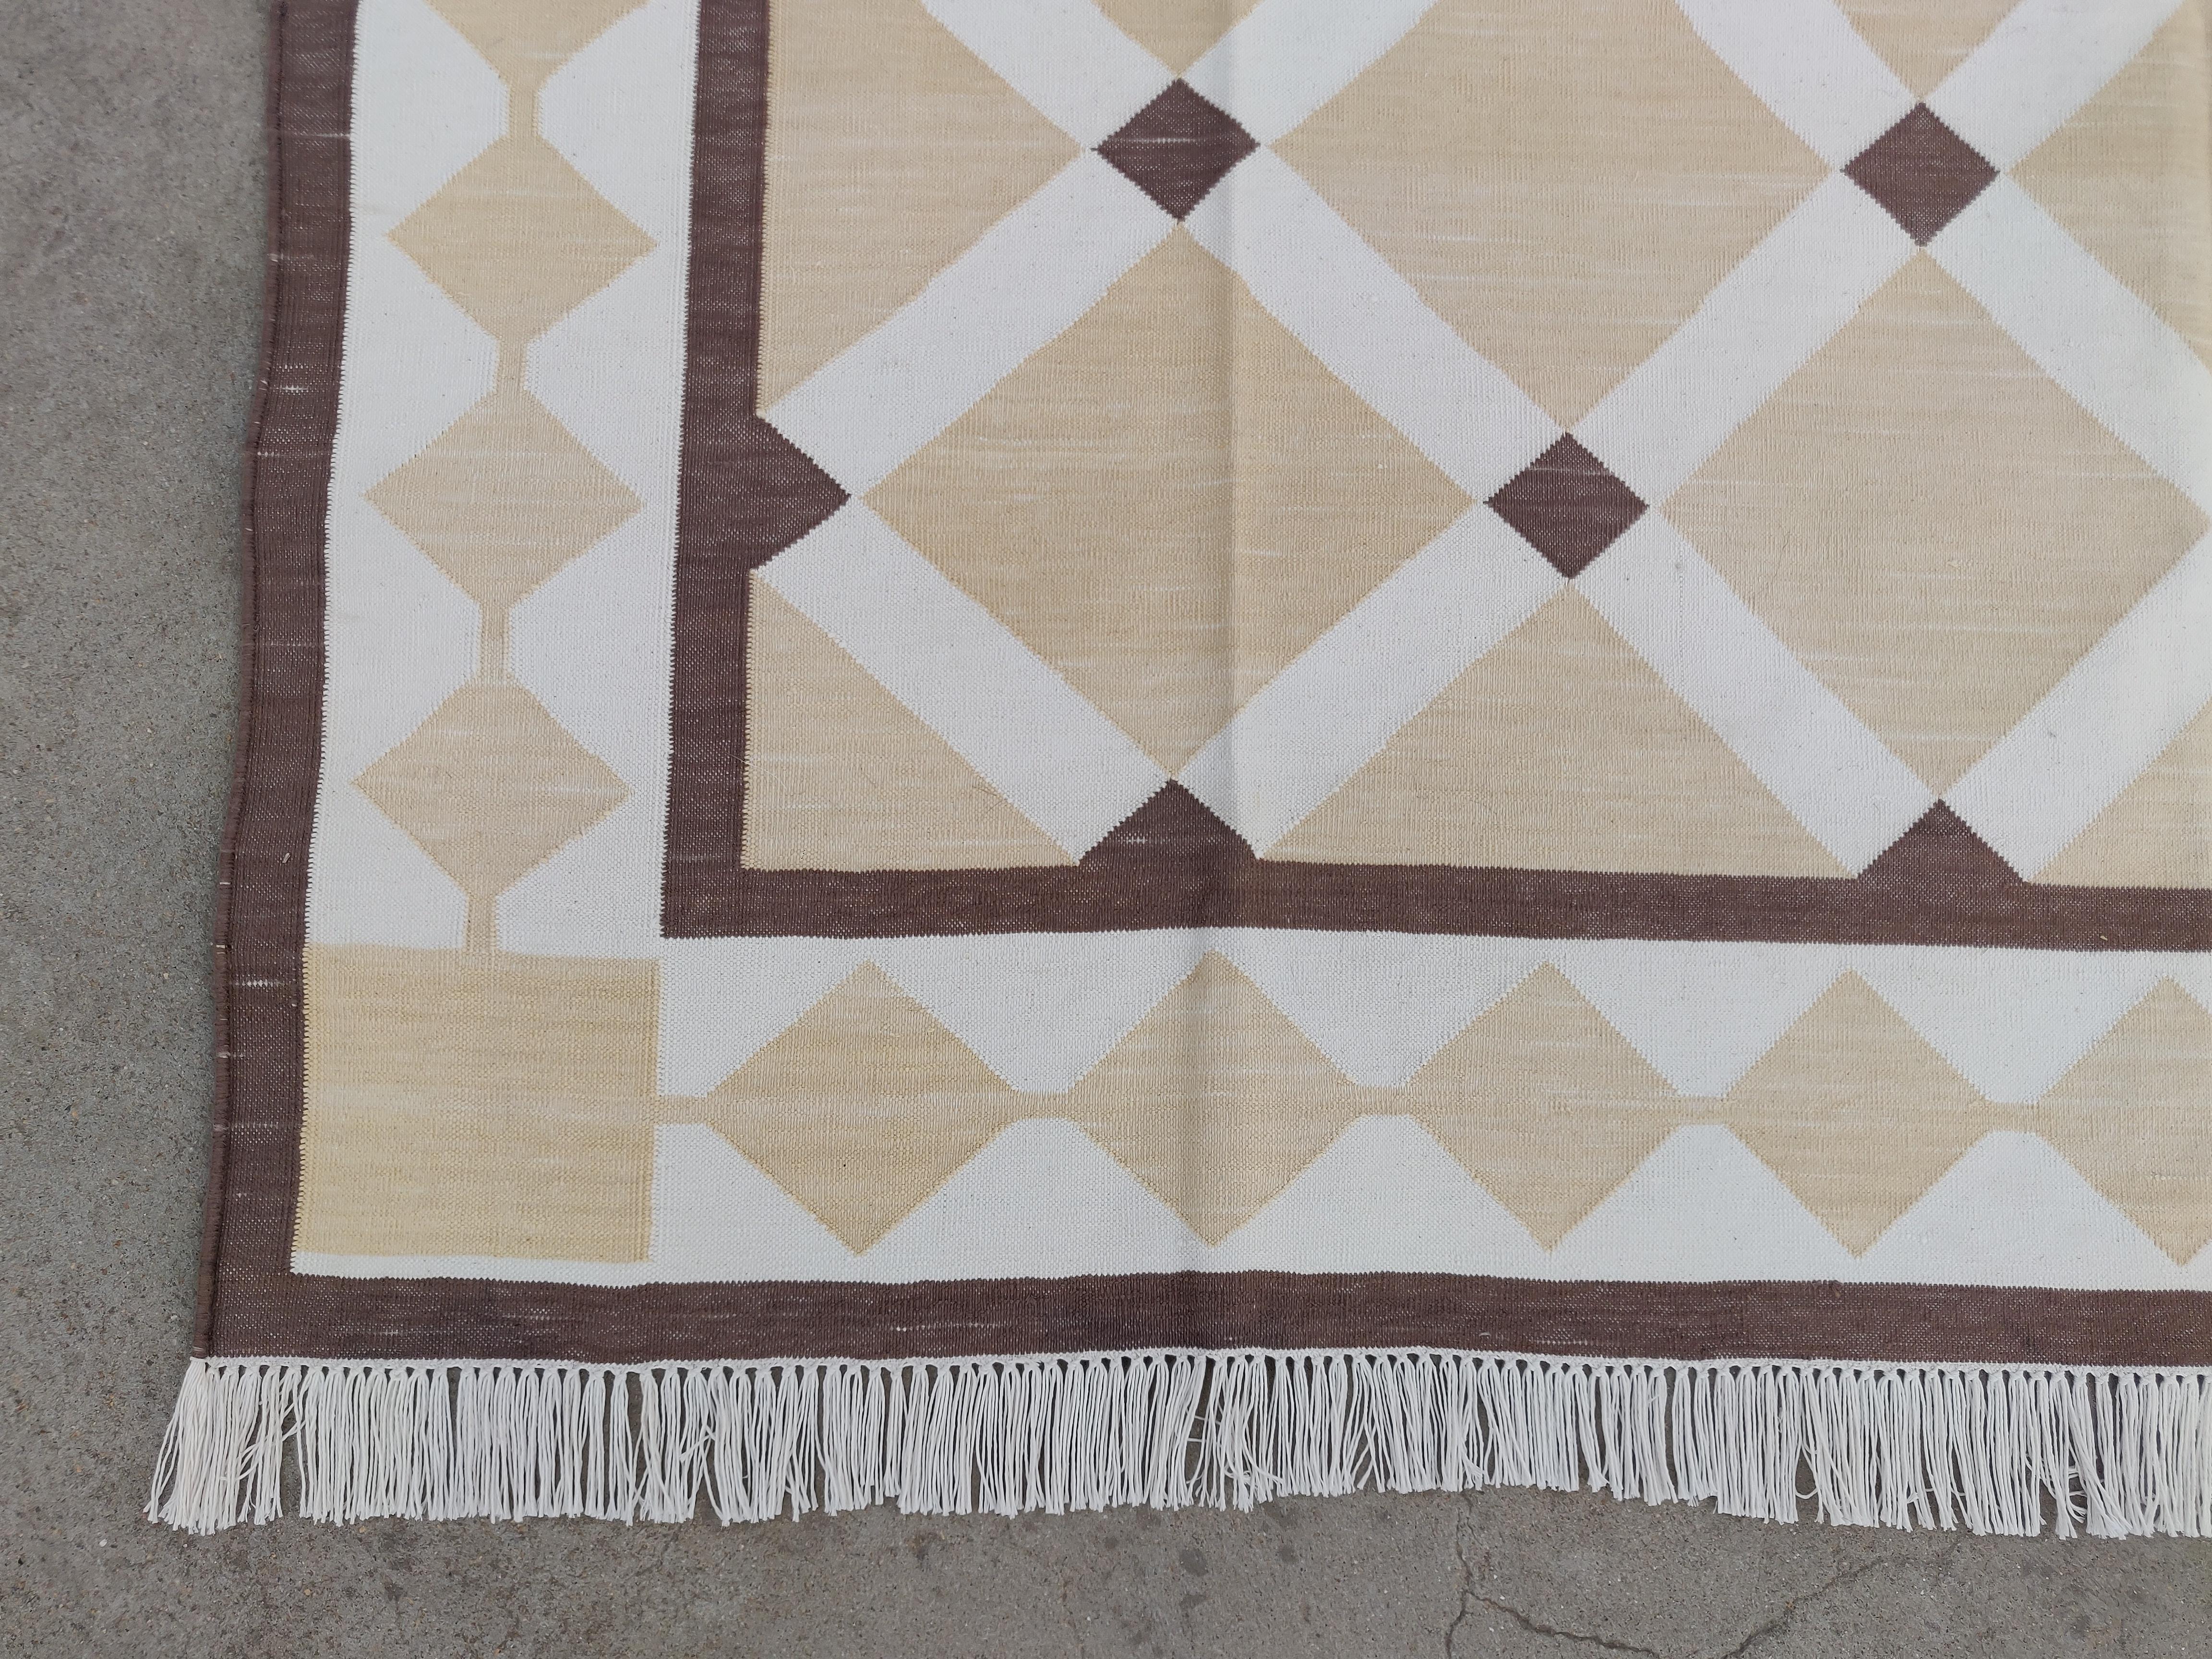 Handmade Cotton Area Flat Weave Rug, 6x9 Beige & Brown Geometric Indian Dhurrie For Sale 2